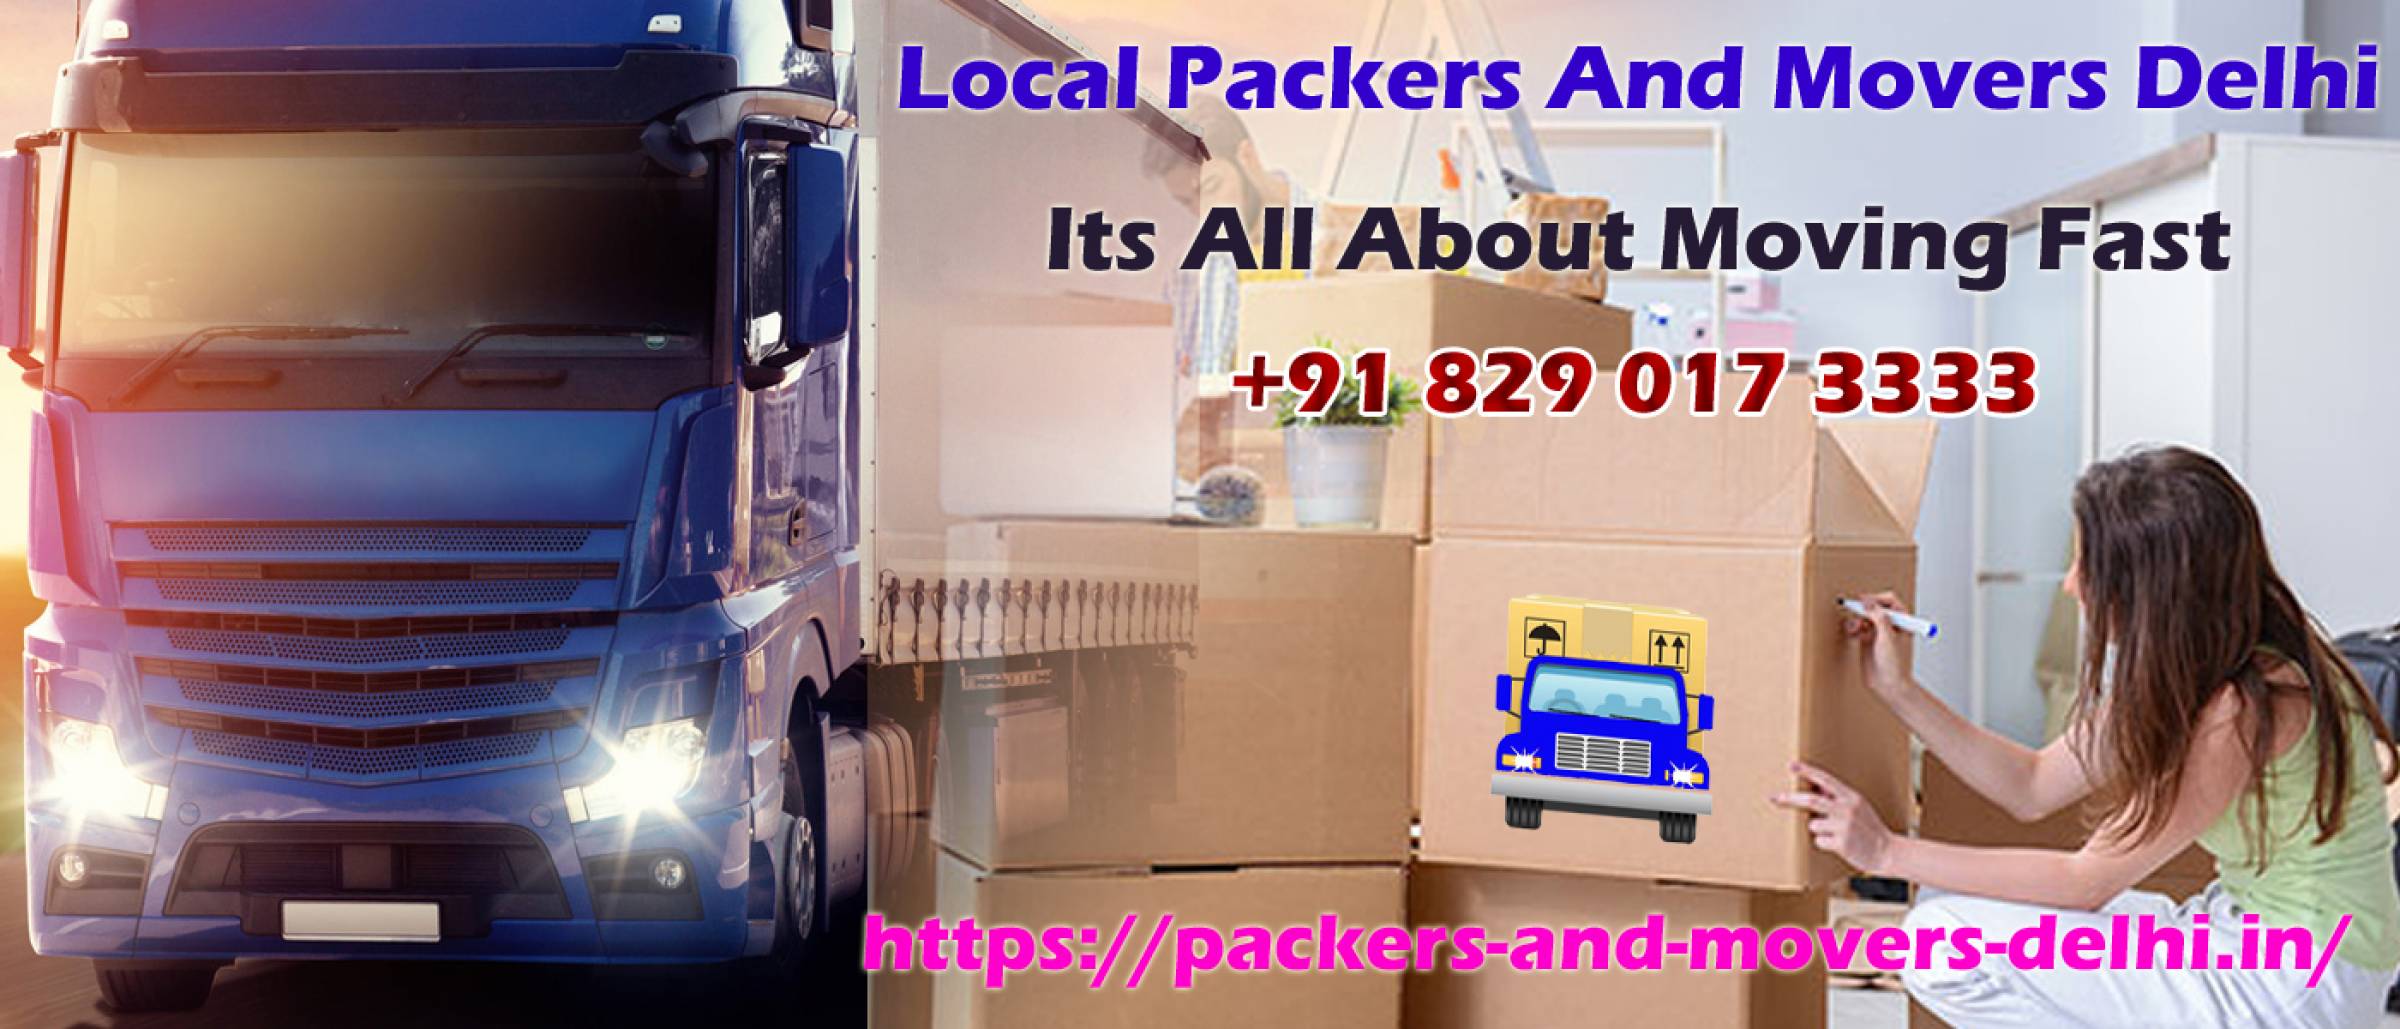 How to choose the best Packers and Movers Delhi Company for your relocation